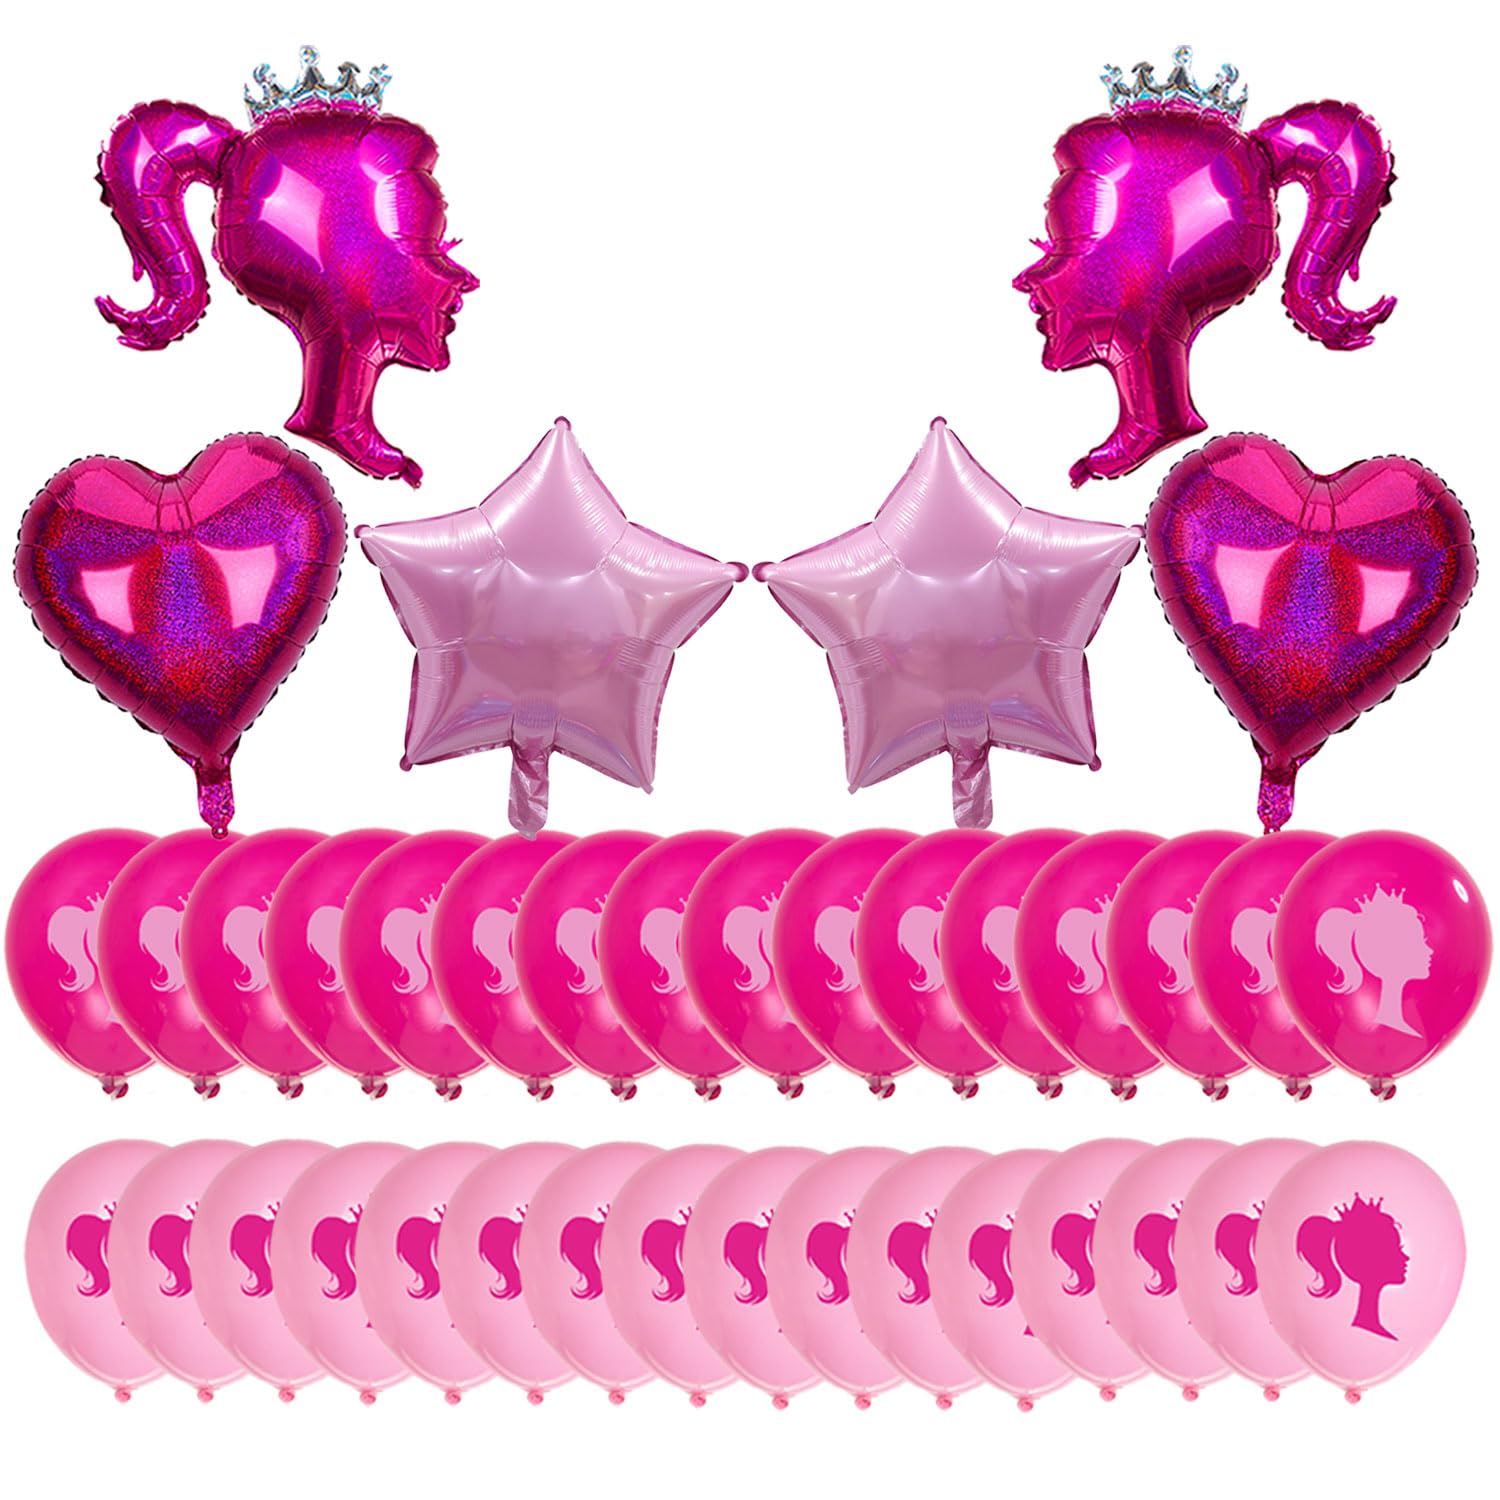 30pcs Hot Pink Princess Doll Foil Balloon Pink Heart Star Balloons Girl Head Latex Globos Kit For Princess Party Decorations Makeup Bachelorette Photo Backdrop Little Girl Adult Birthday Supply